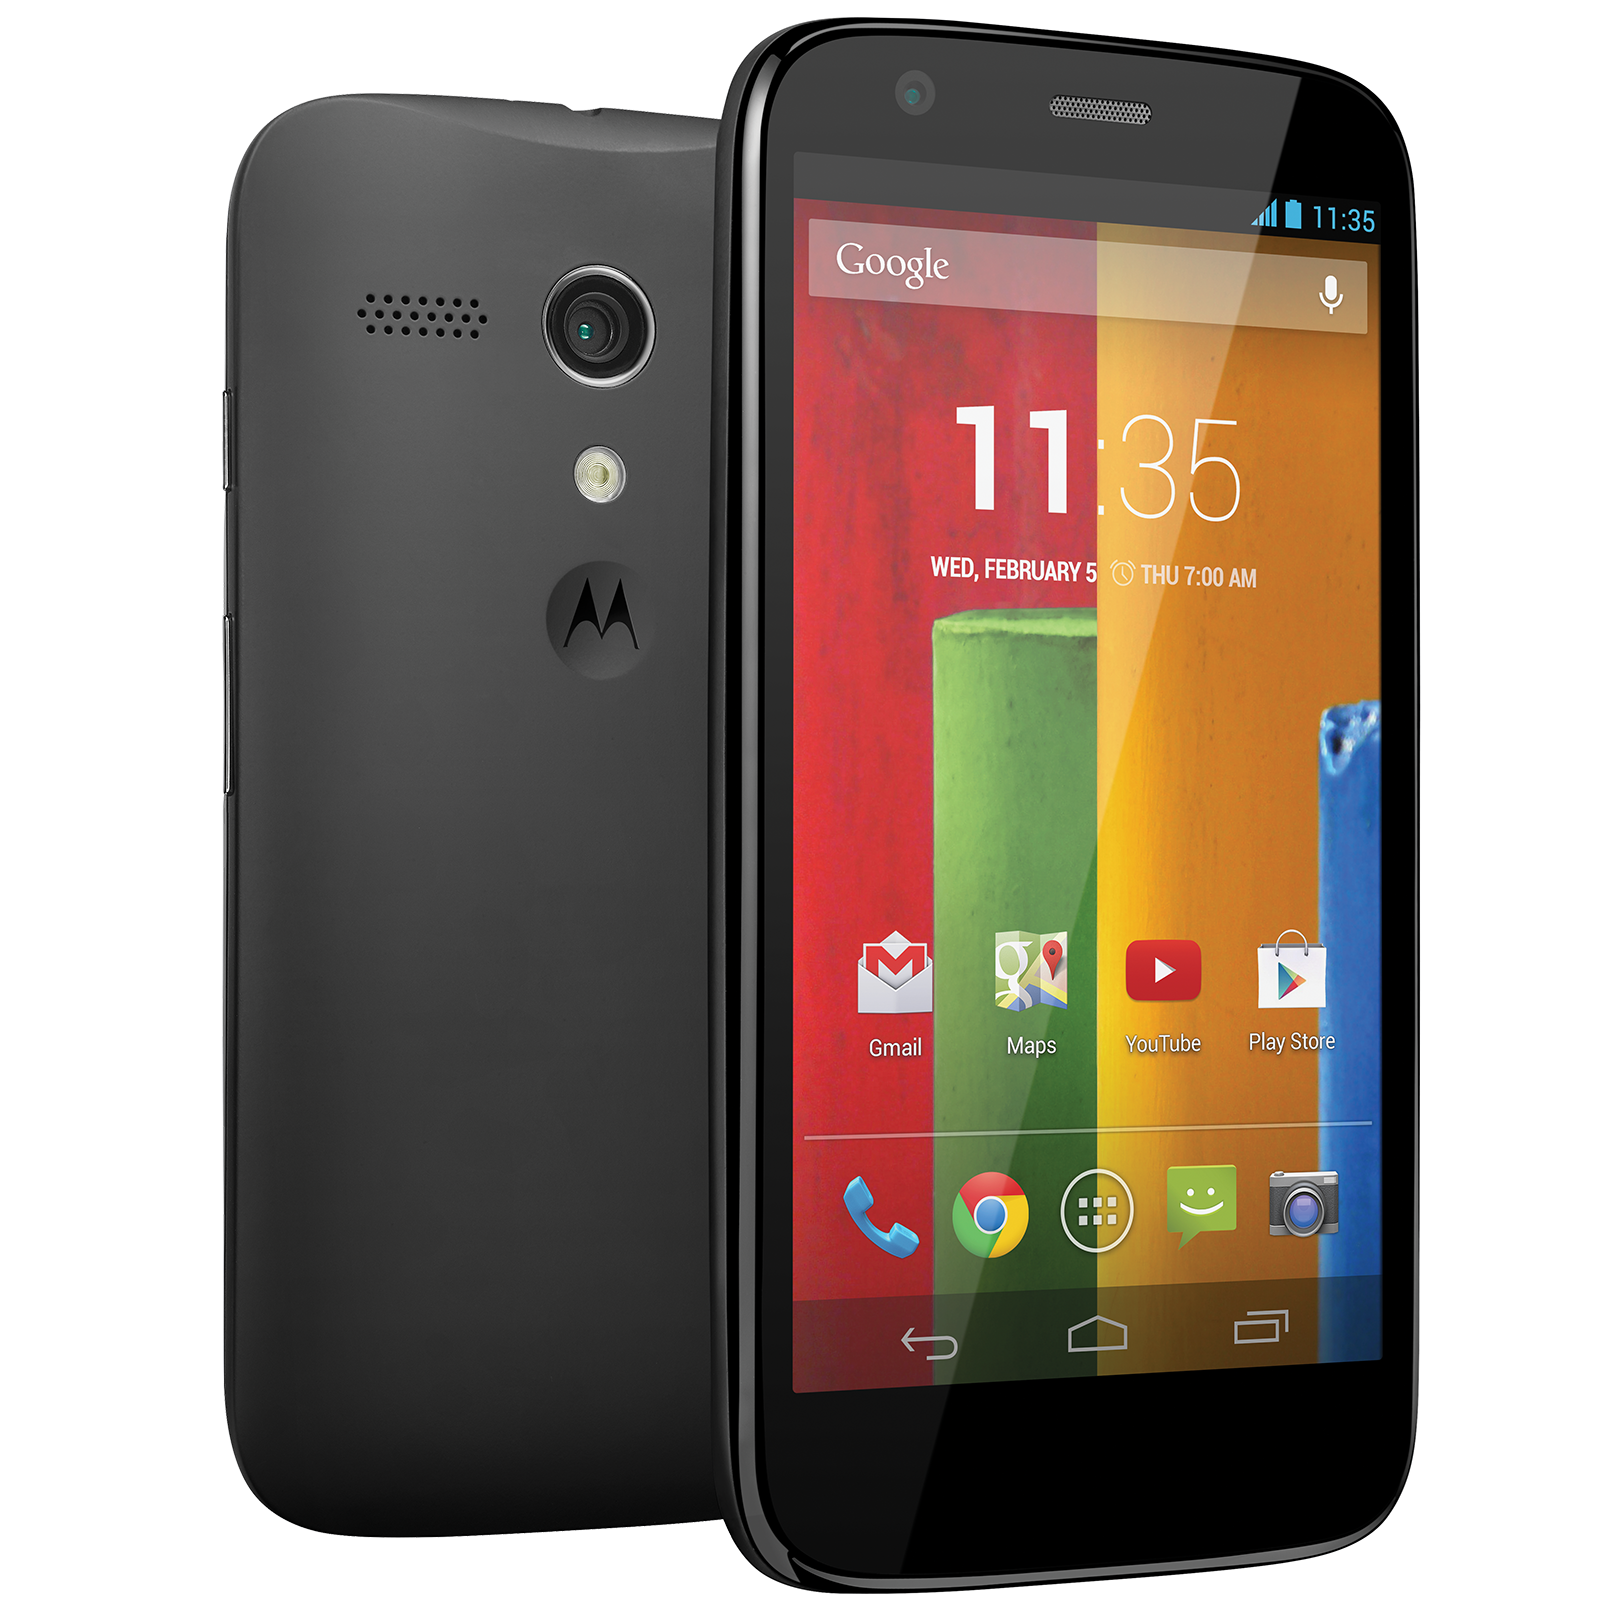 Motorola Moto G available for $99.99 online at U.S. Cellular, in stores